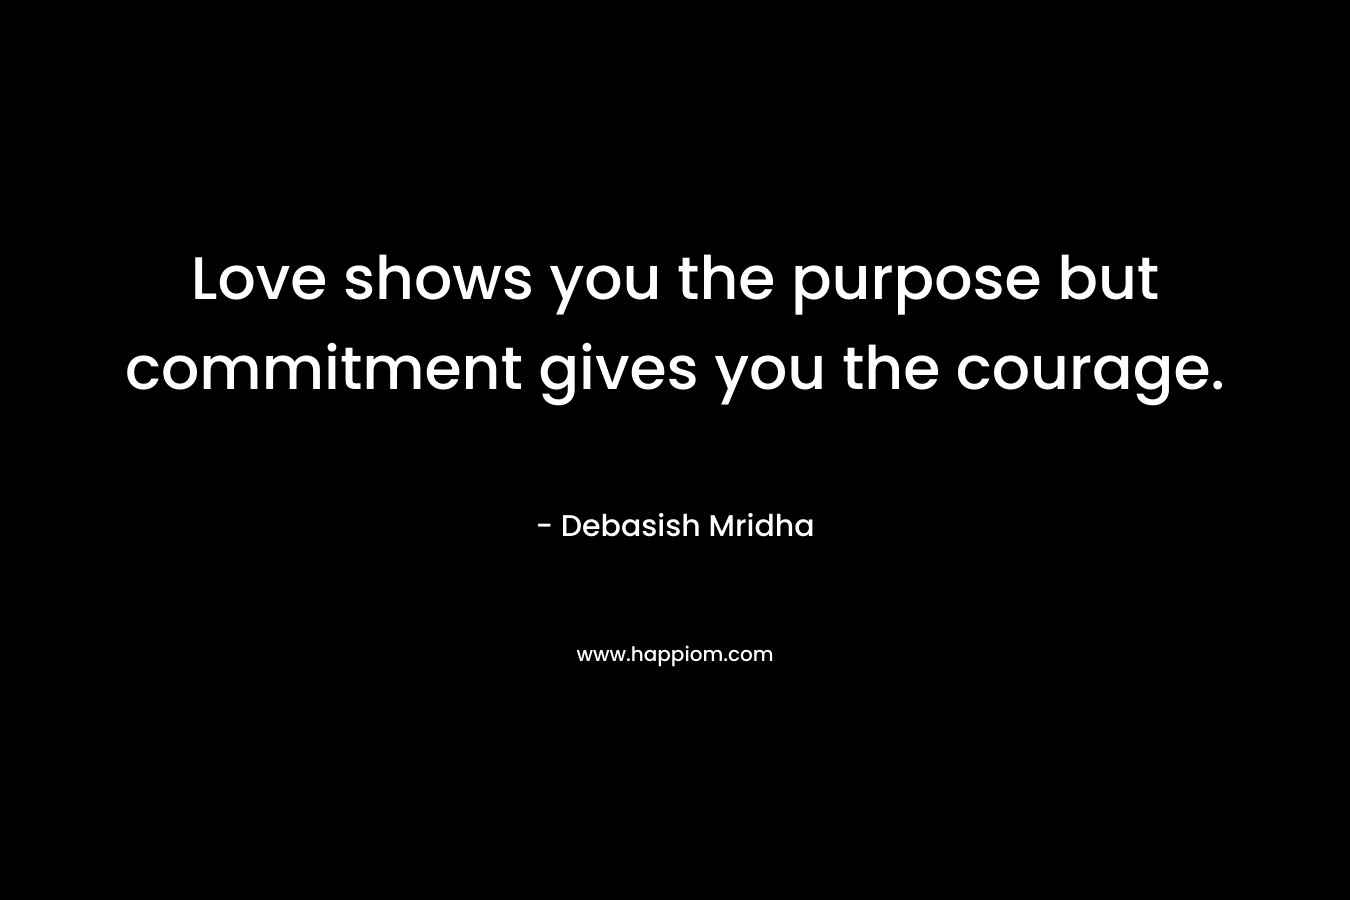 Love shows you the purpose but commitment gives you the courage.